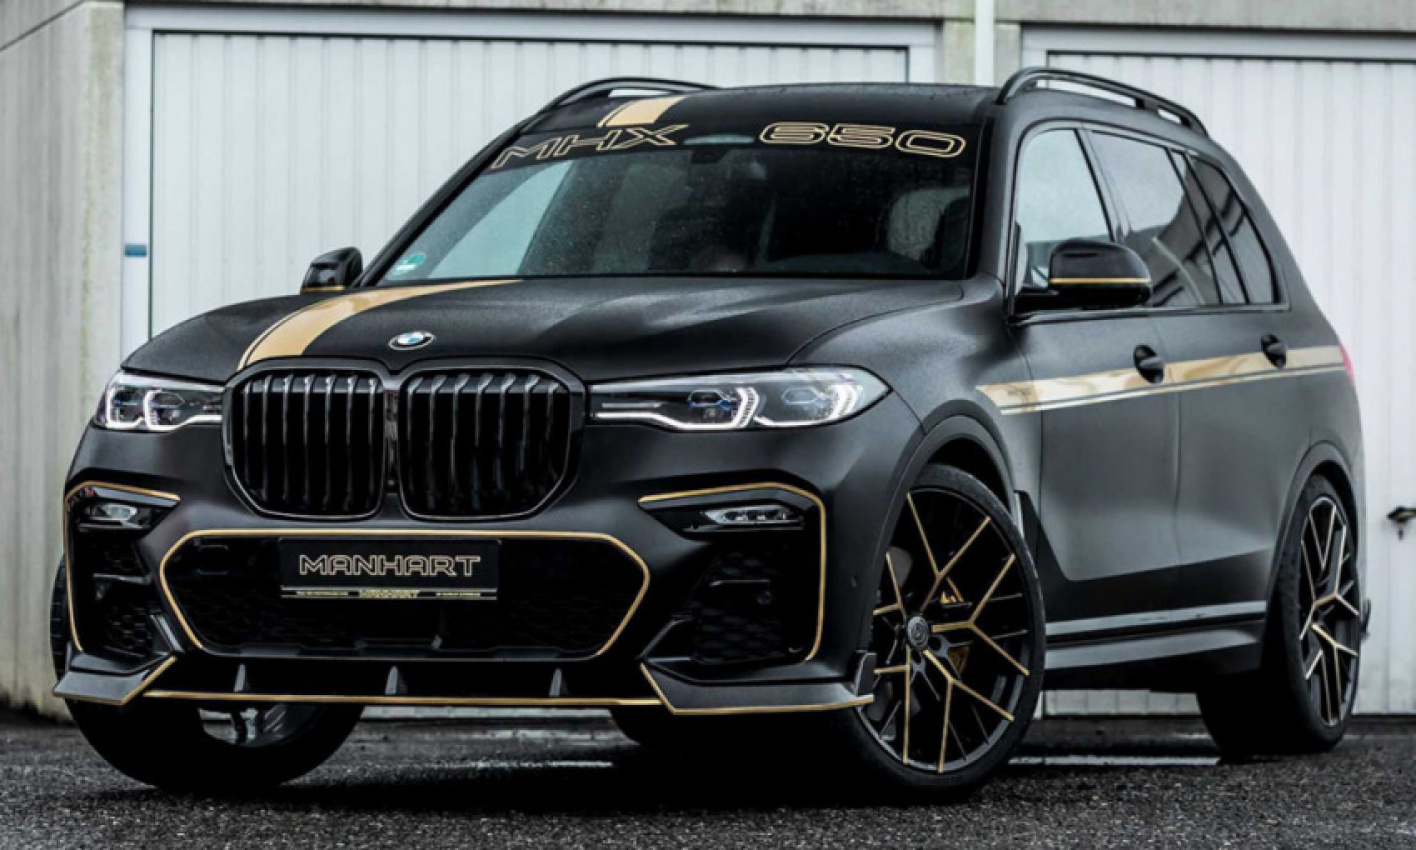 autos, bmw, cars, new models, bmw x7, manhart, manhart bmw, manhart bmw x7, manhart x7, mhx7 650, modified, suv, v8, manhart bmw x7 makeover comes with 478 kw and lots of carbon fibre